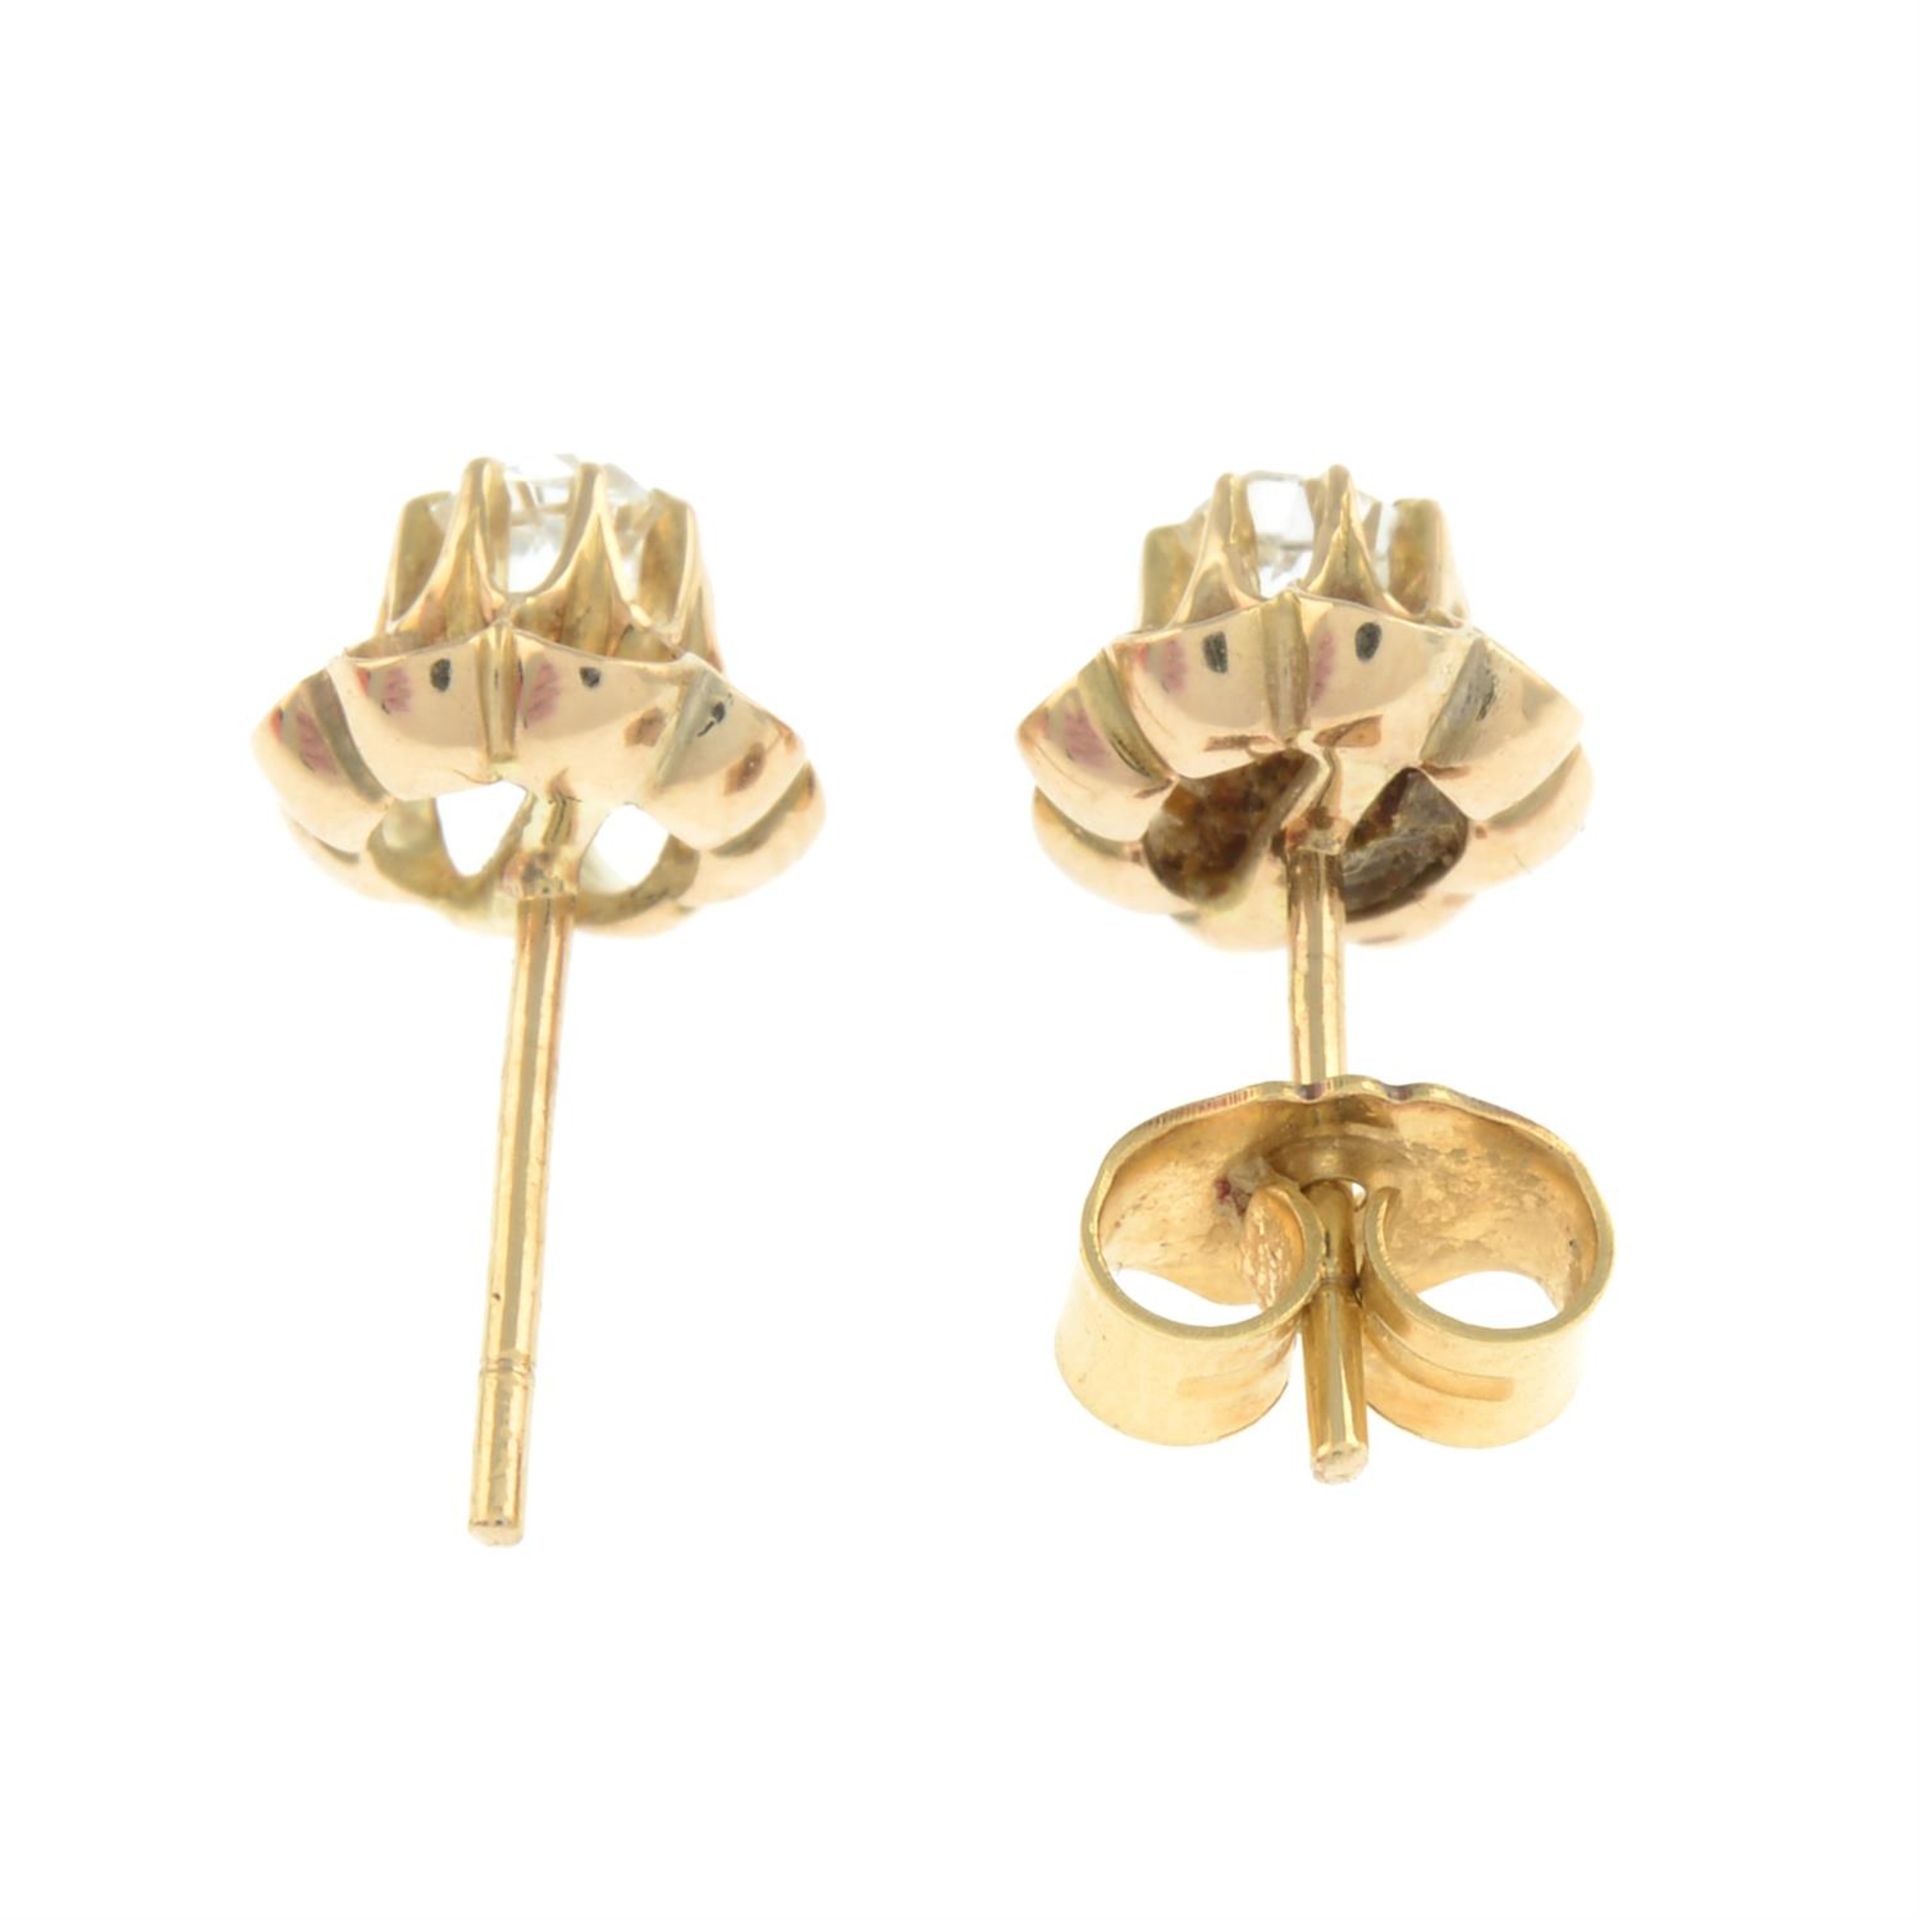 Early 20th century gold diamond earrings - Image 2 of 2